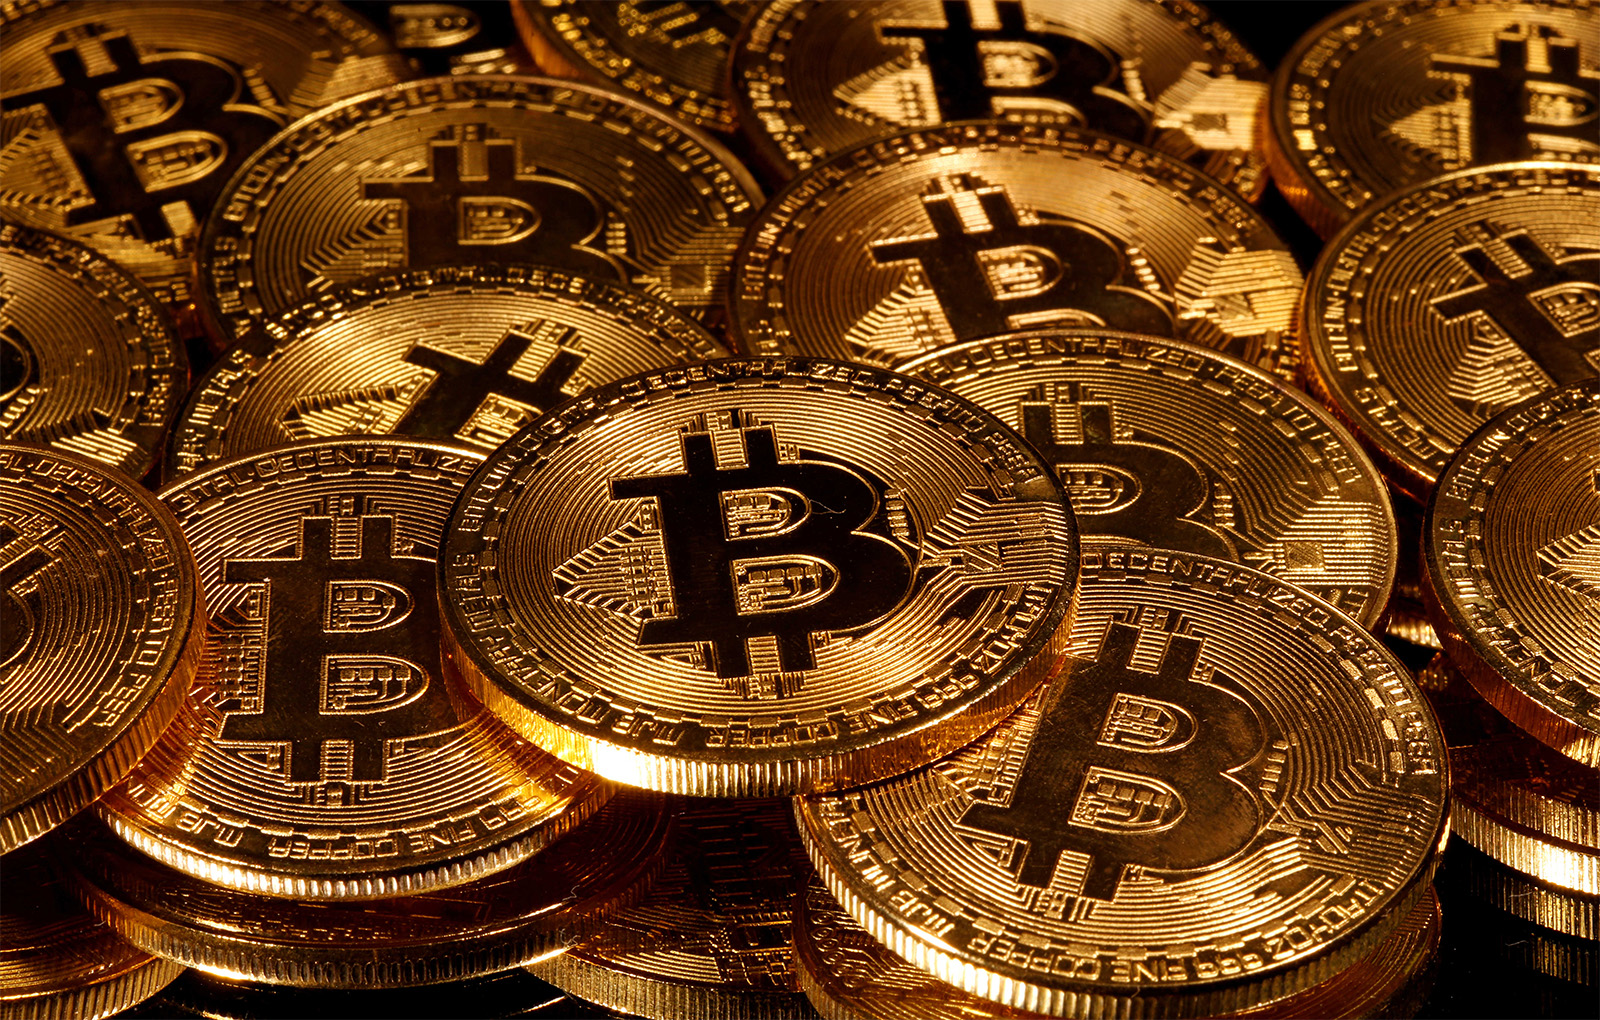 Millions of bitcoins stolen from an American businessman in Spain